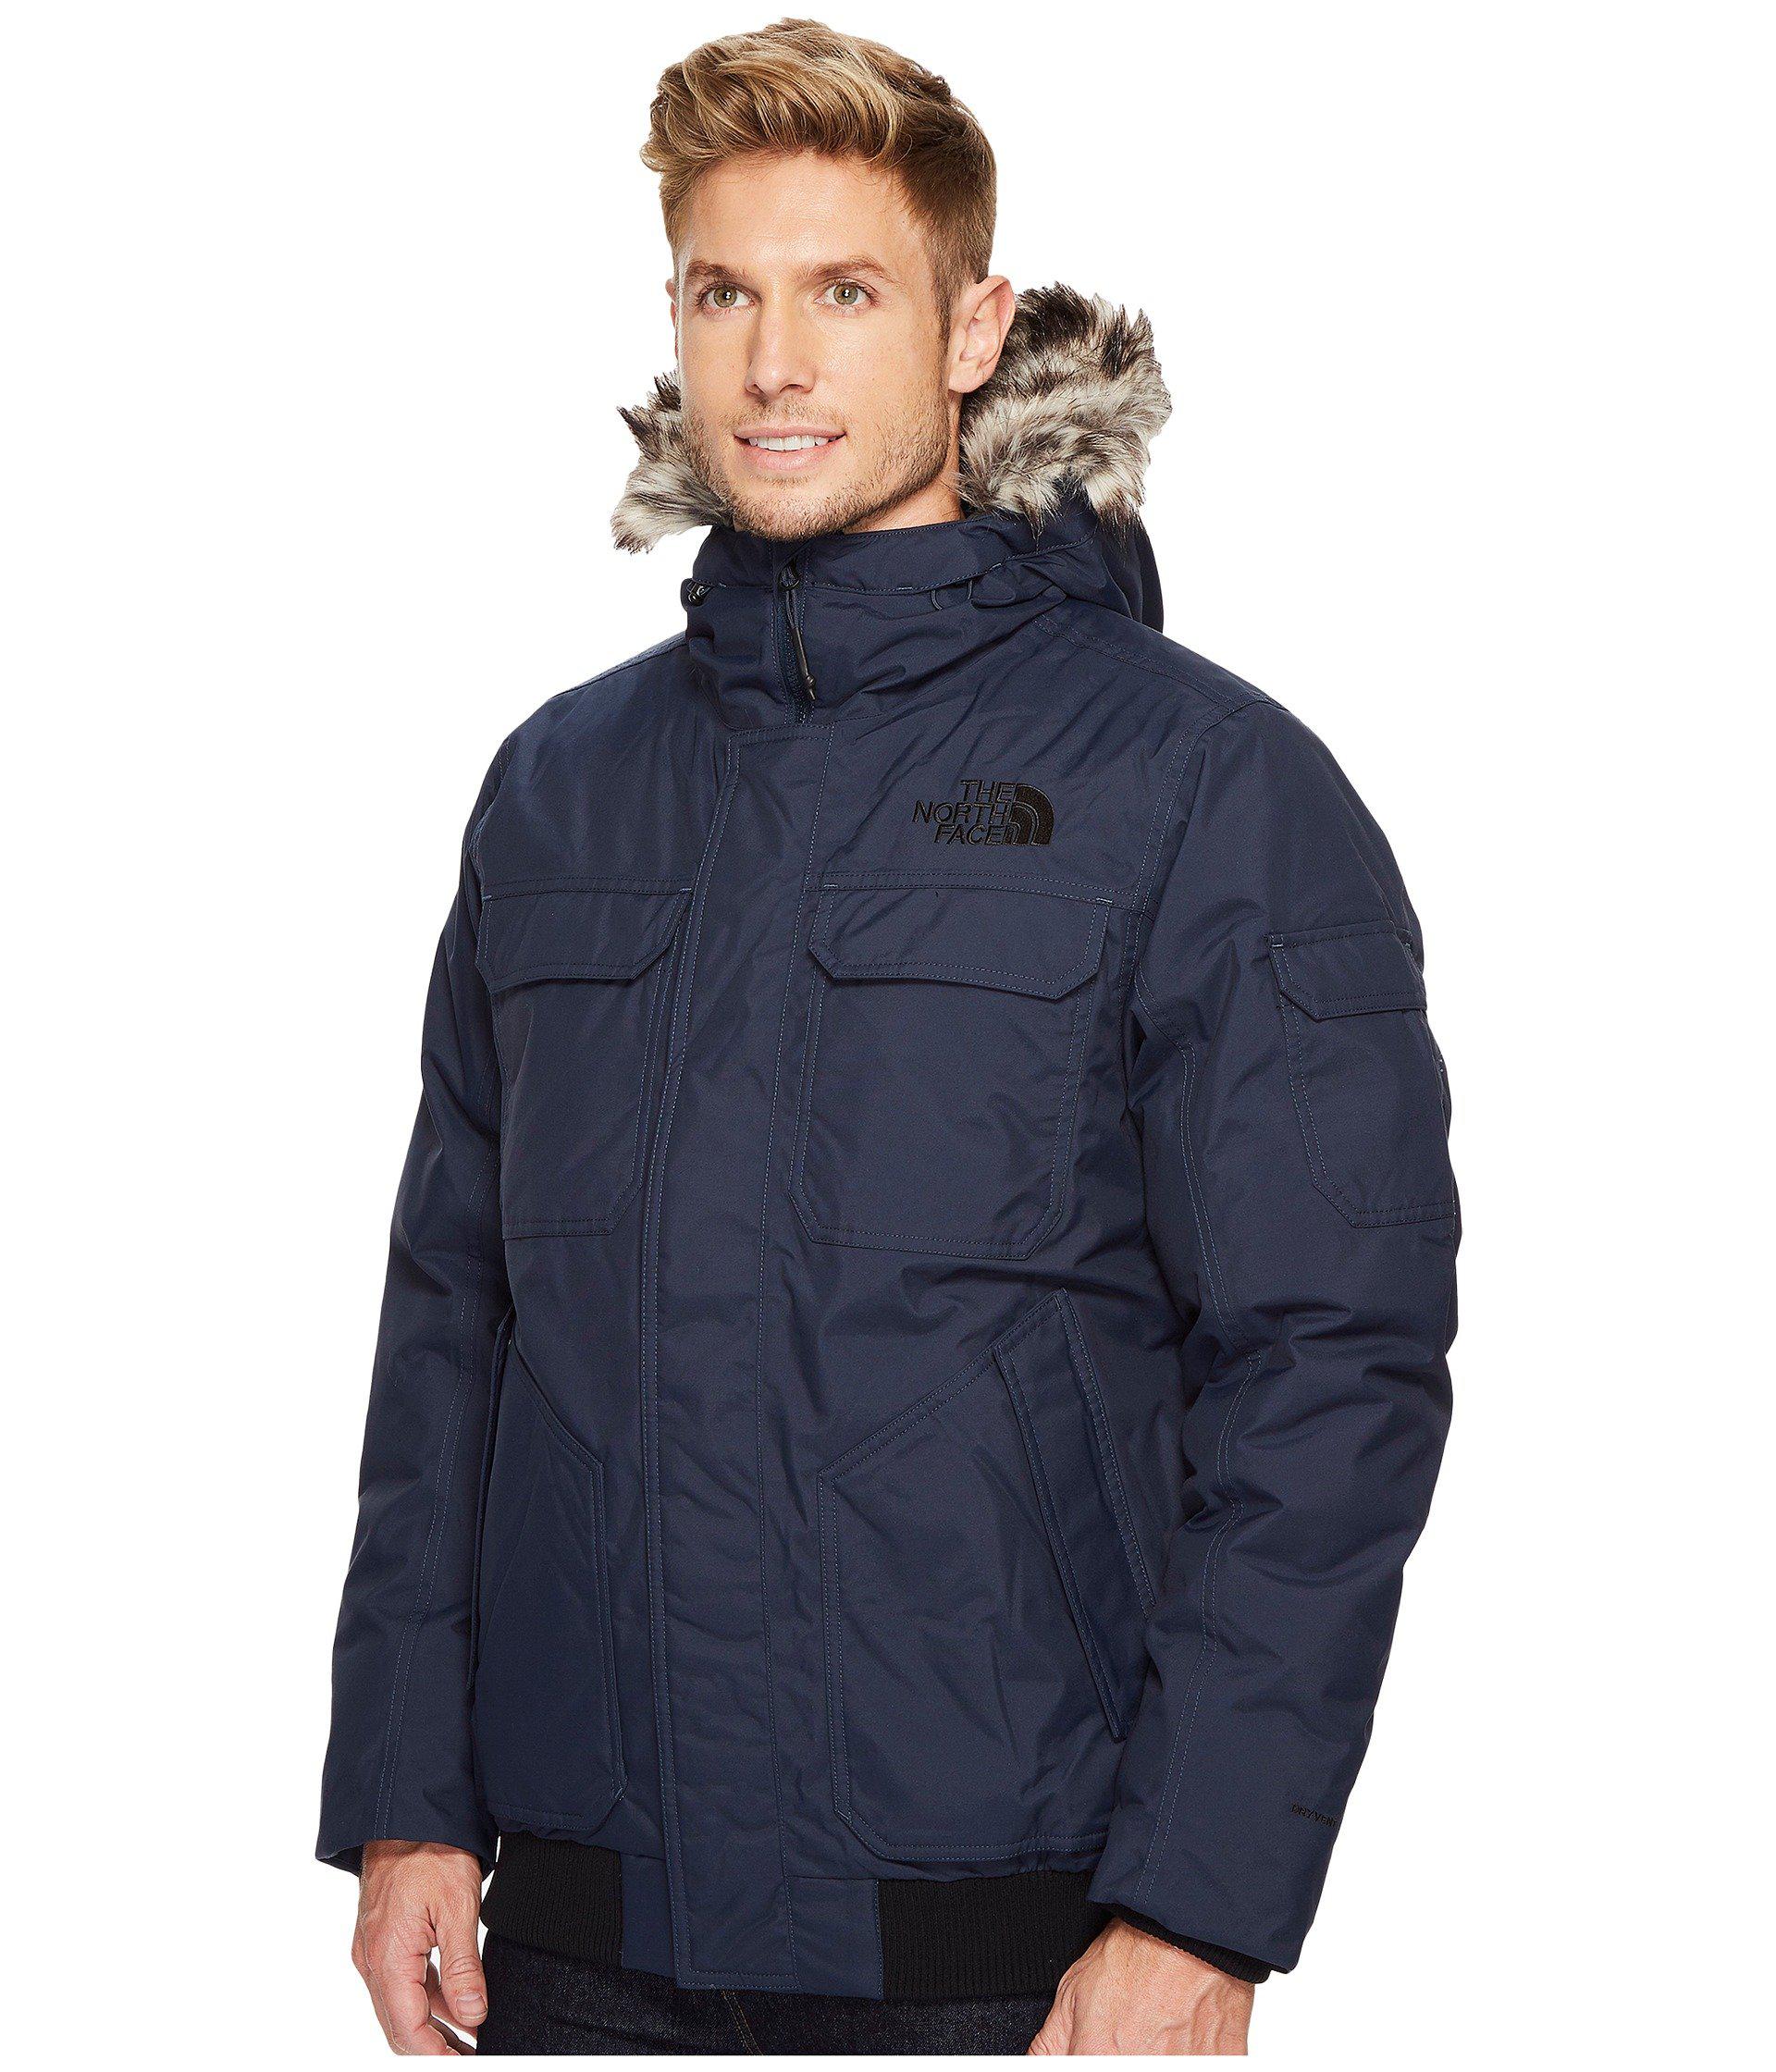 the north face gotham jacket iii Online 